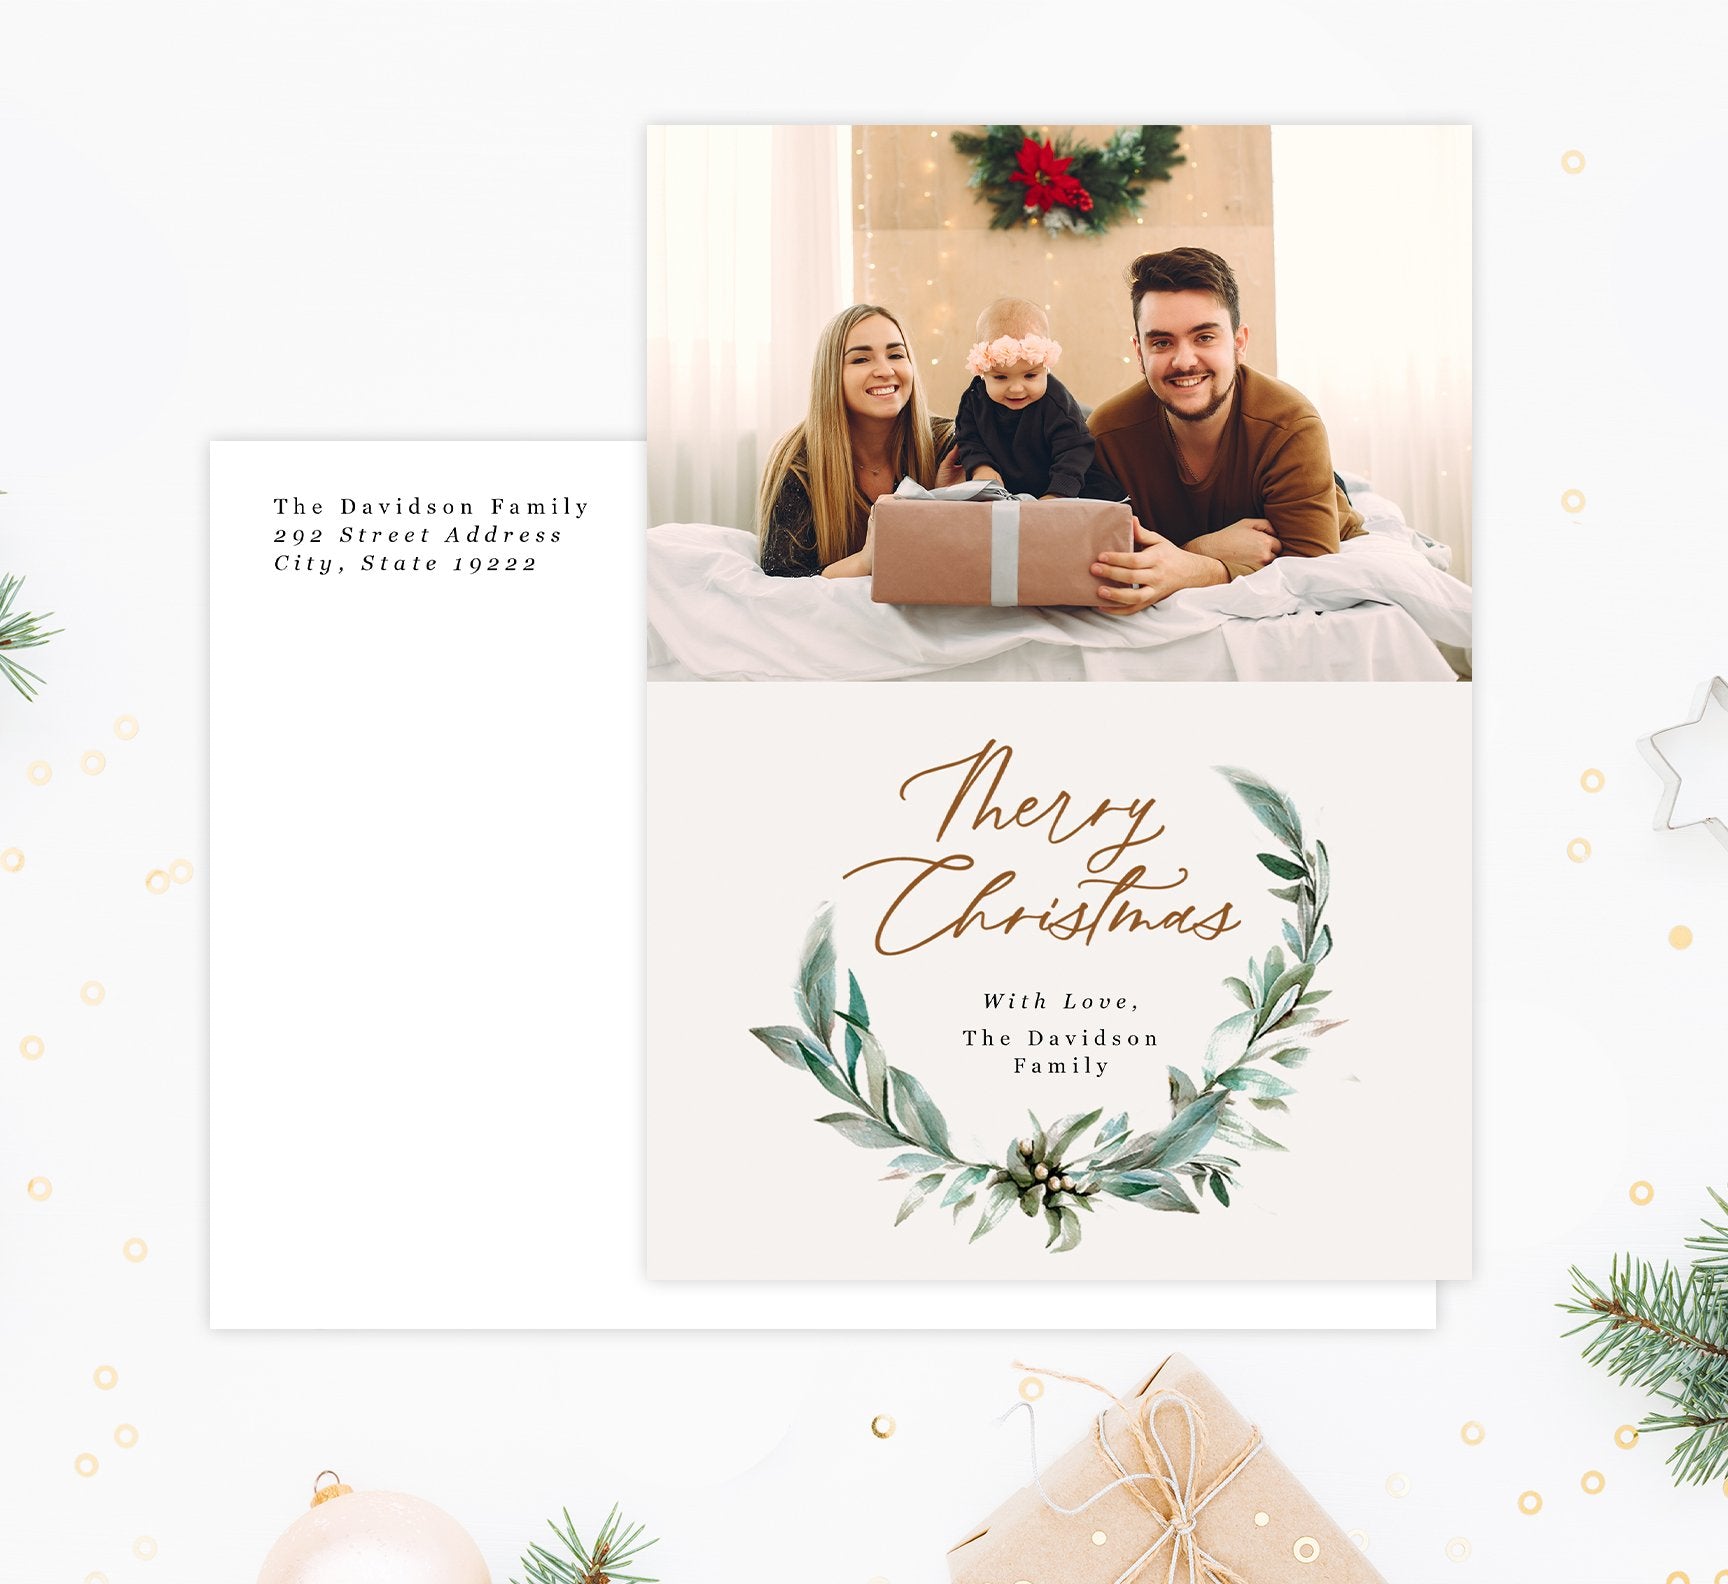 Christmas Wreath Holiday Card Mockup; Holiday card with envelope and return address printed on it. 